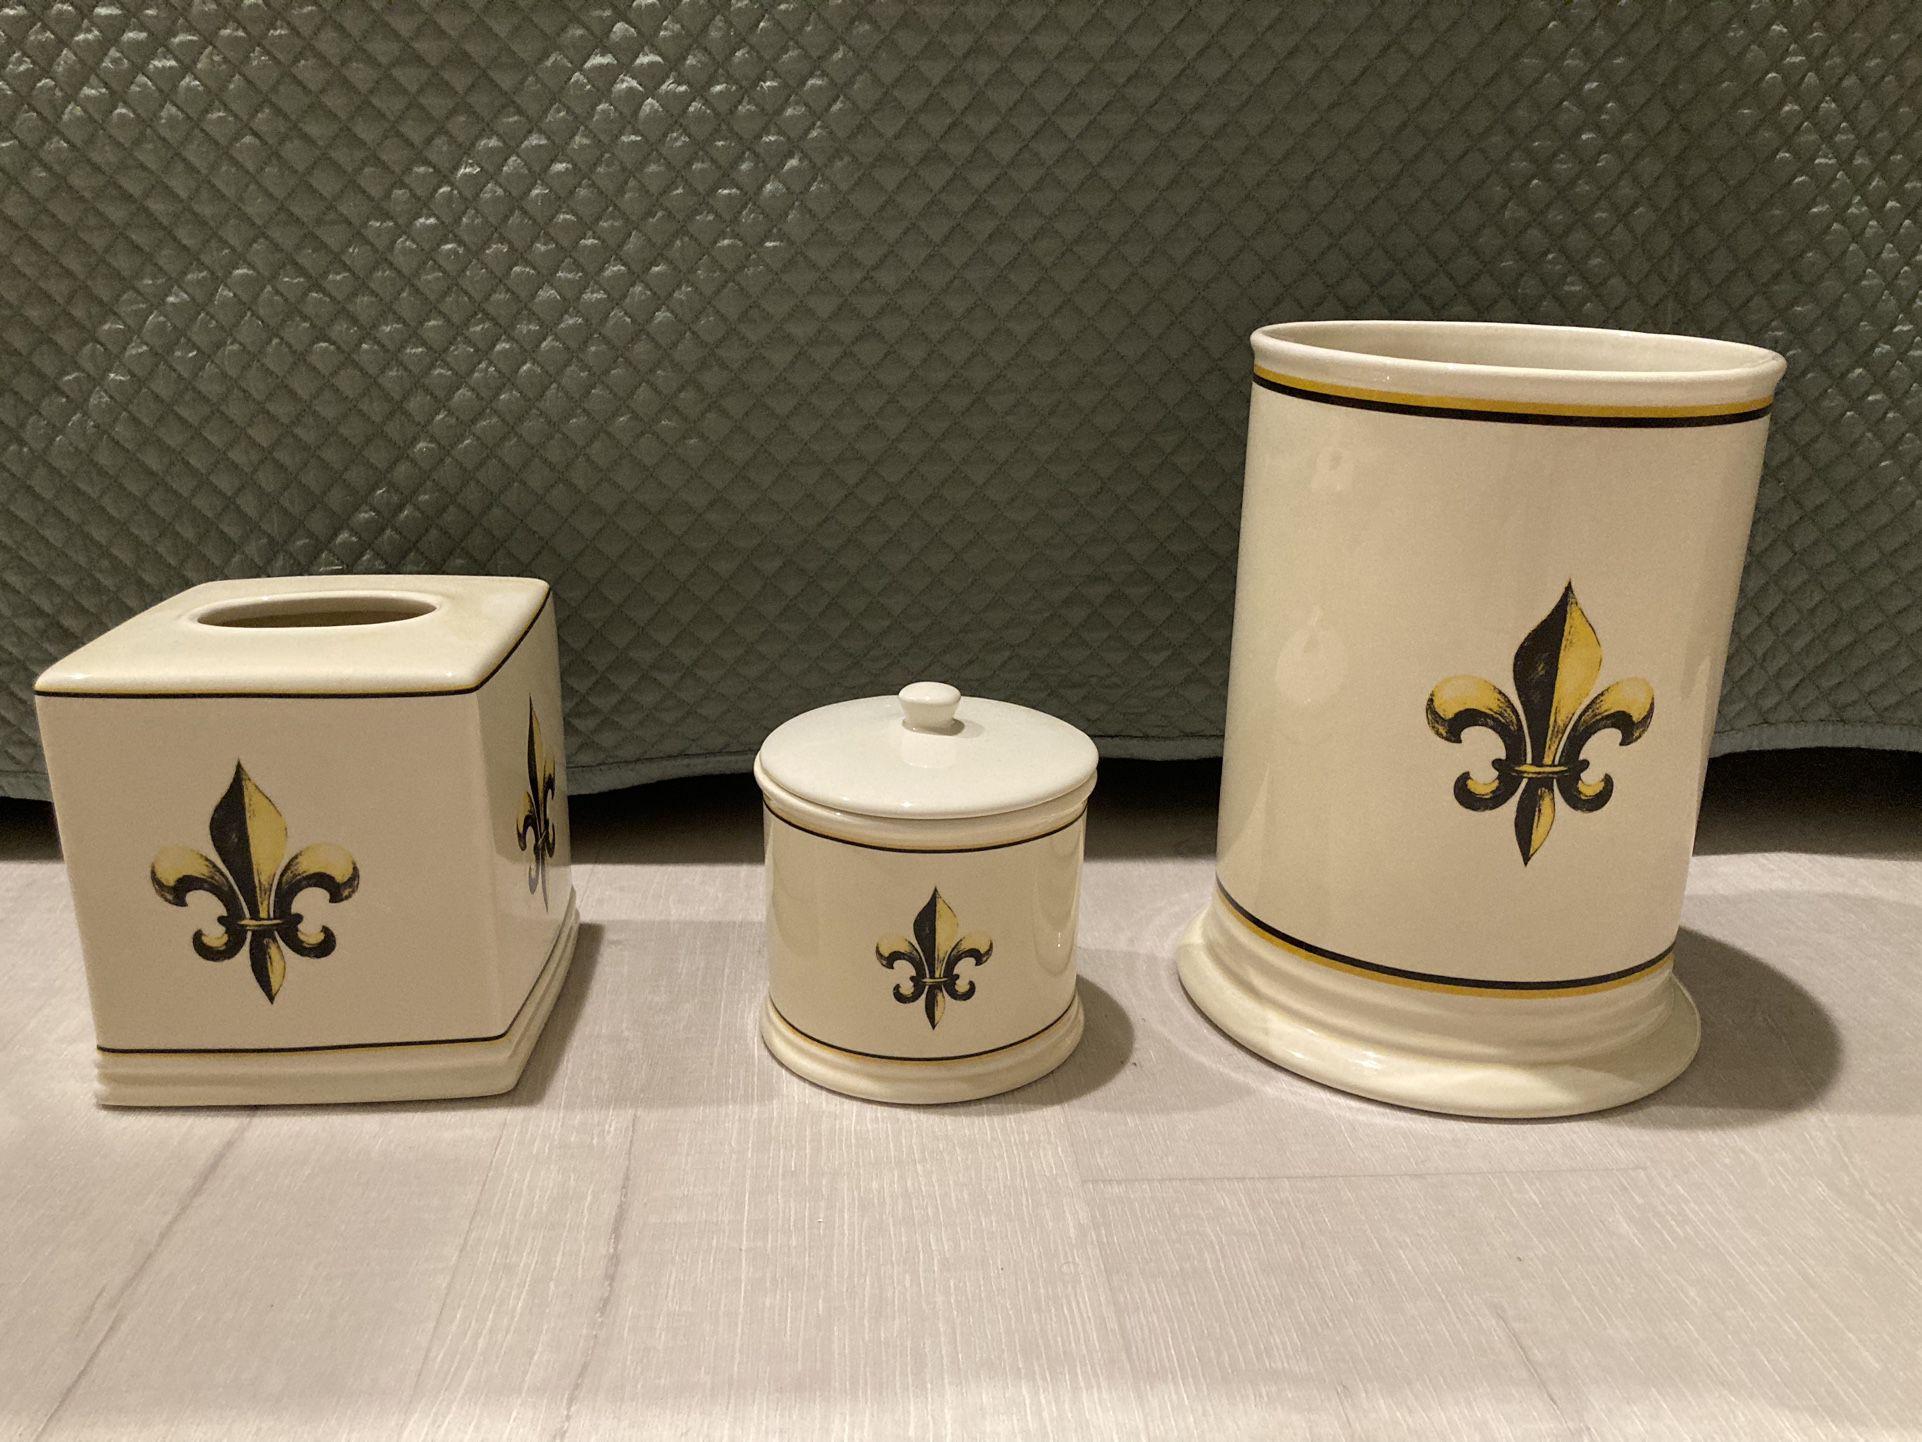 New Orleans Fleur De Lis 3 Piece Bathroom Set Brand New Condition.  Tissue Box Holder, Apothecary Container Jar & Trash Can Waste Basket! All 3..